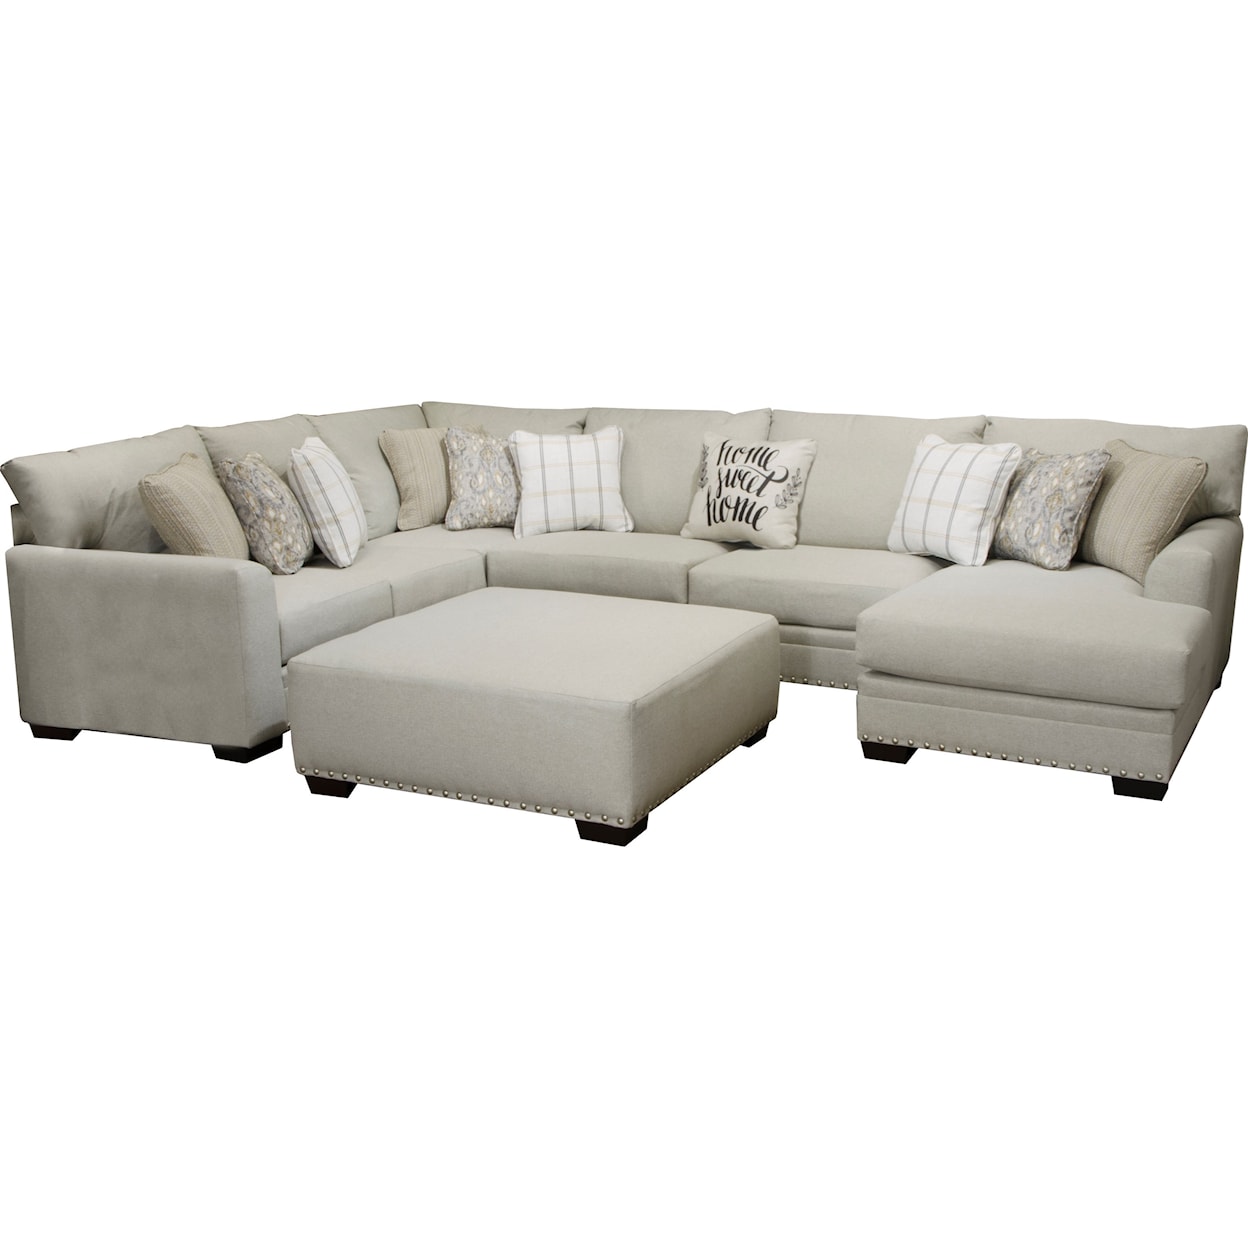 Carolina Furniture 4478 Middleton 3-Piece Sectional with Chaise